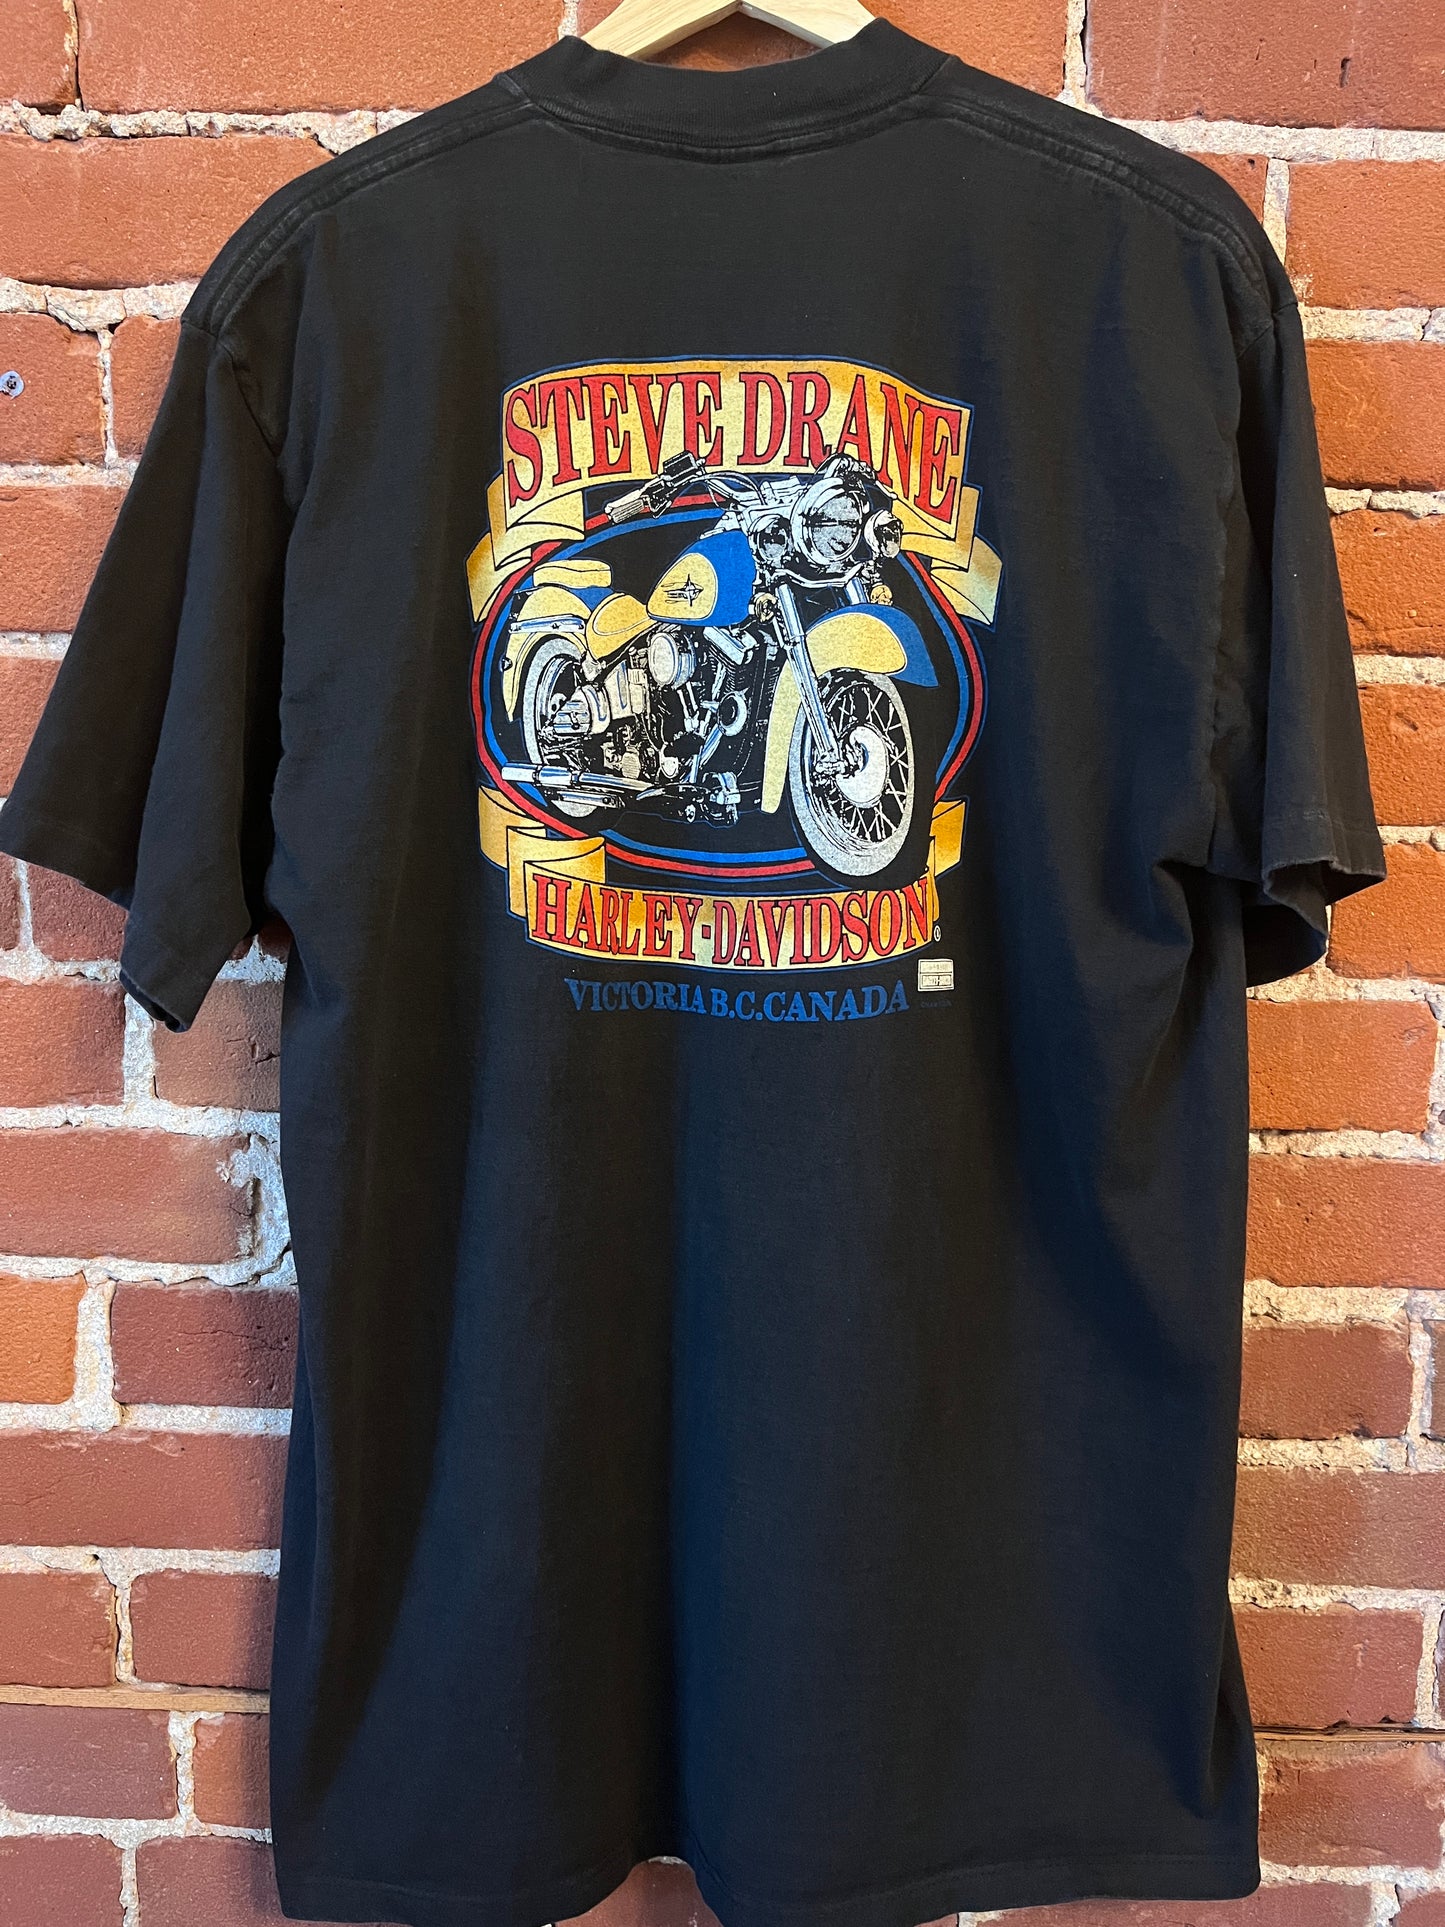 Harley Davidson The Evolution of Motorcycling / back graphic Steve Drane Victoria B.C. Canada 90s